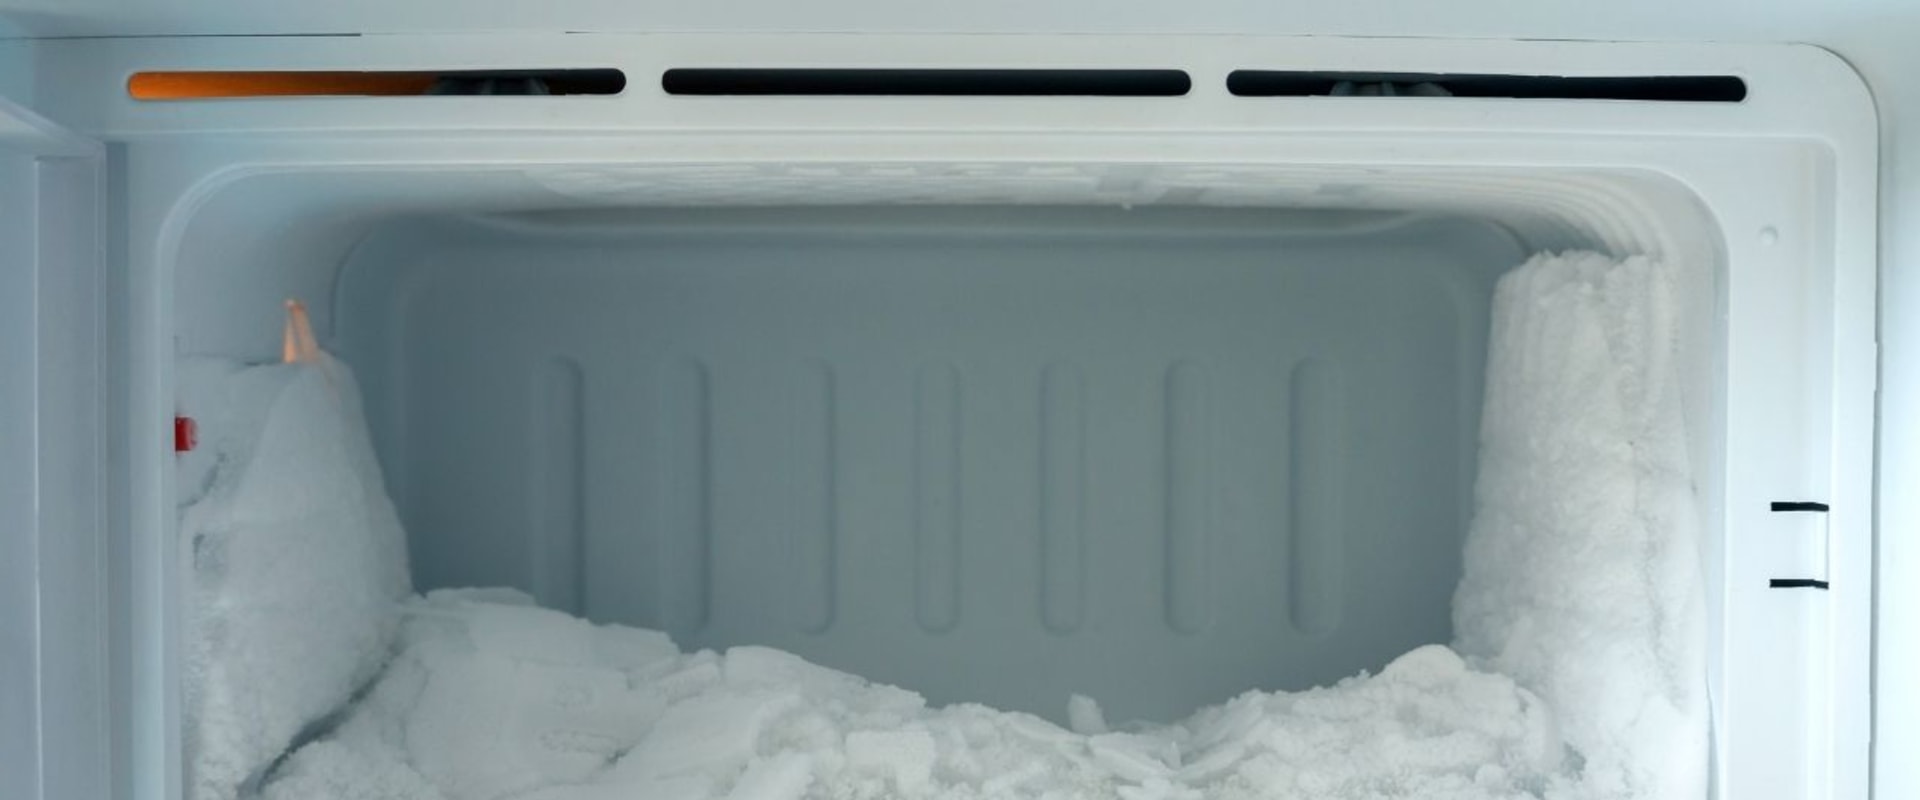 6 Signs Your Refrigerator Freezer is Going Bad